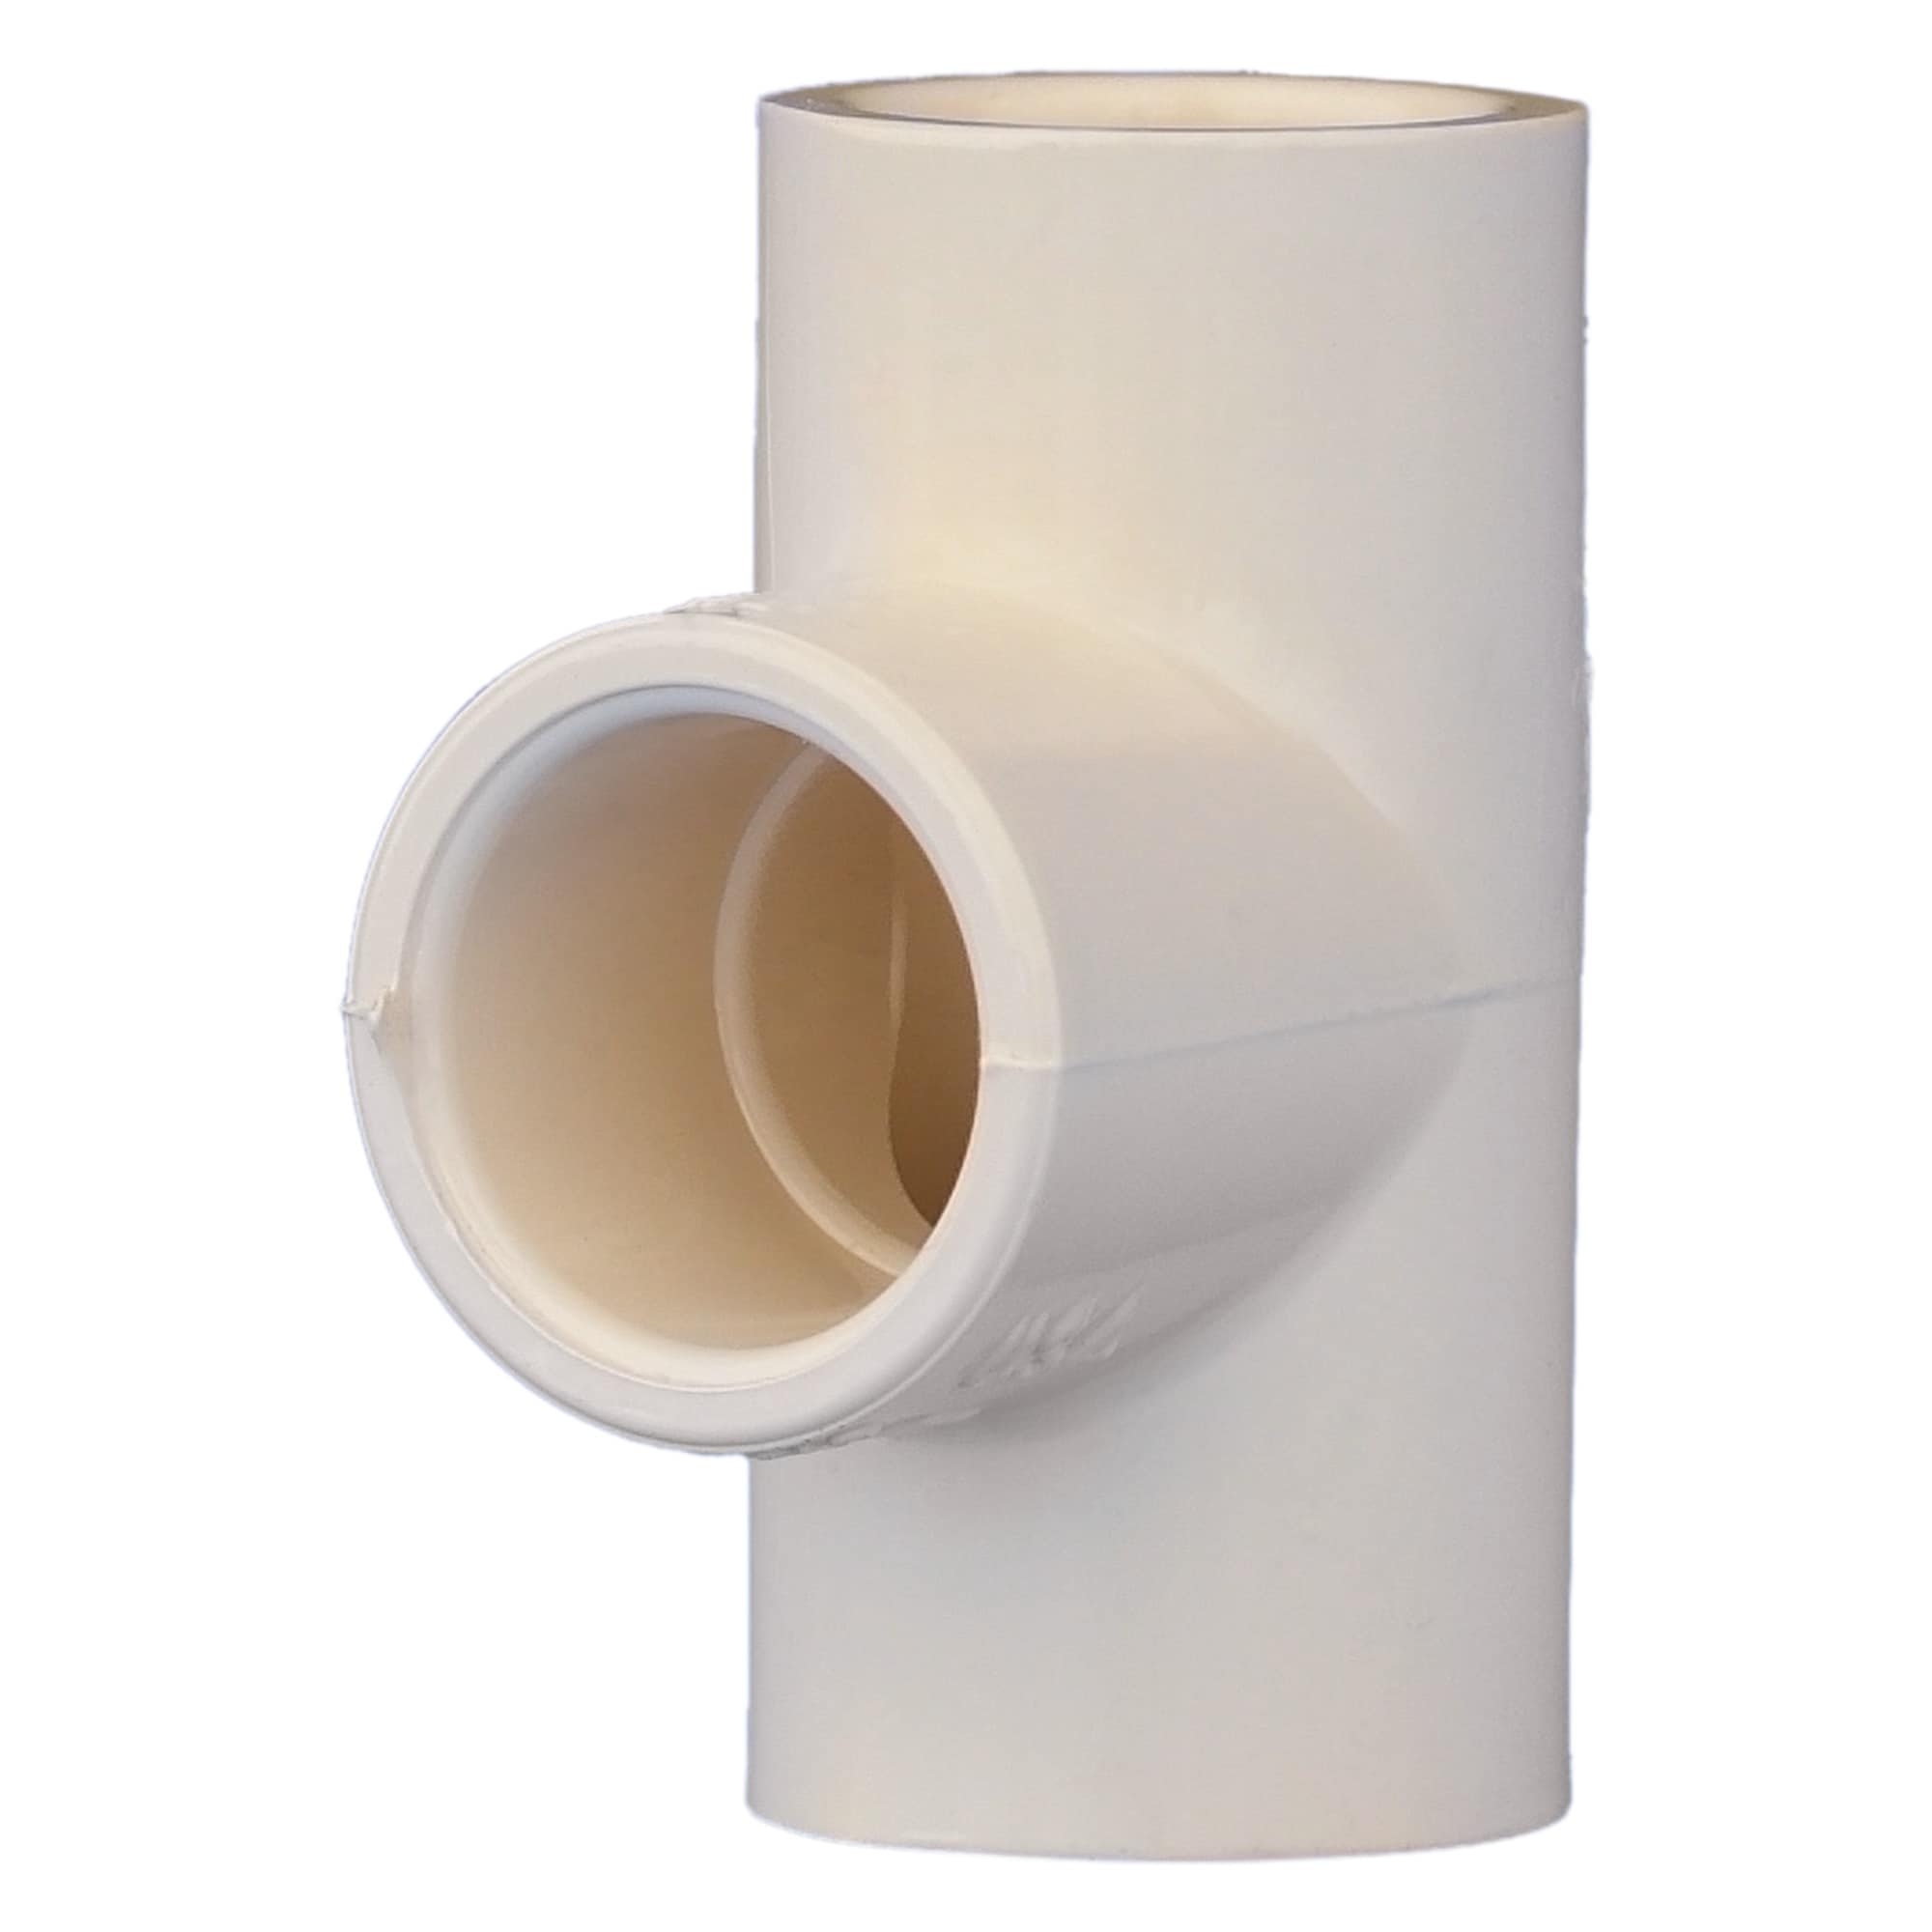 Charlotte Pipe 1/2 CTS CPVC Tee | Potable Water | 100 PSI | NSF Approved | Cream Color | Hot & Cold Water Distribution | CTS 02400 0600 -  CTS 02400  0600